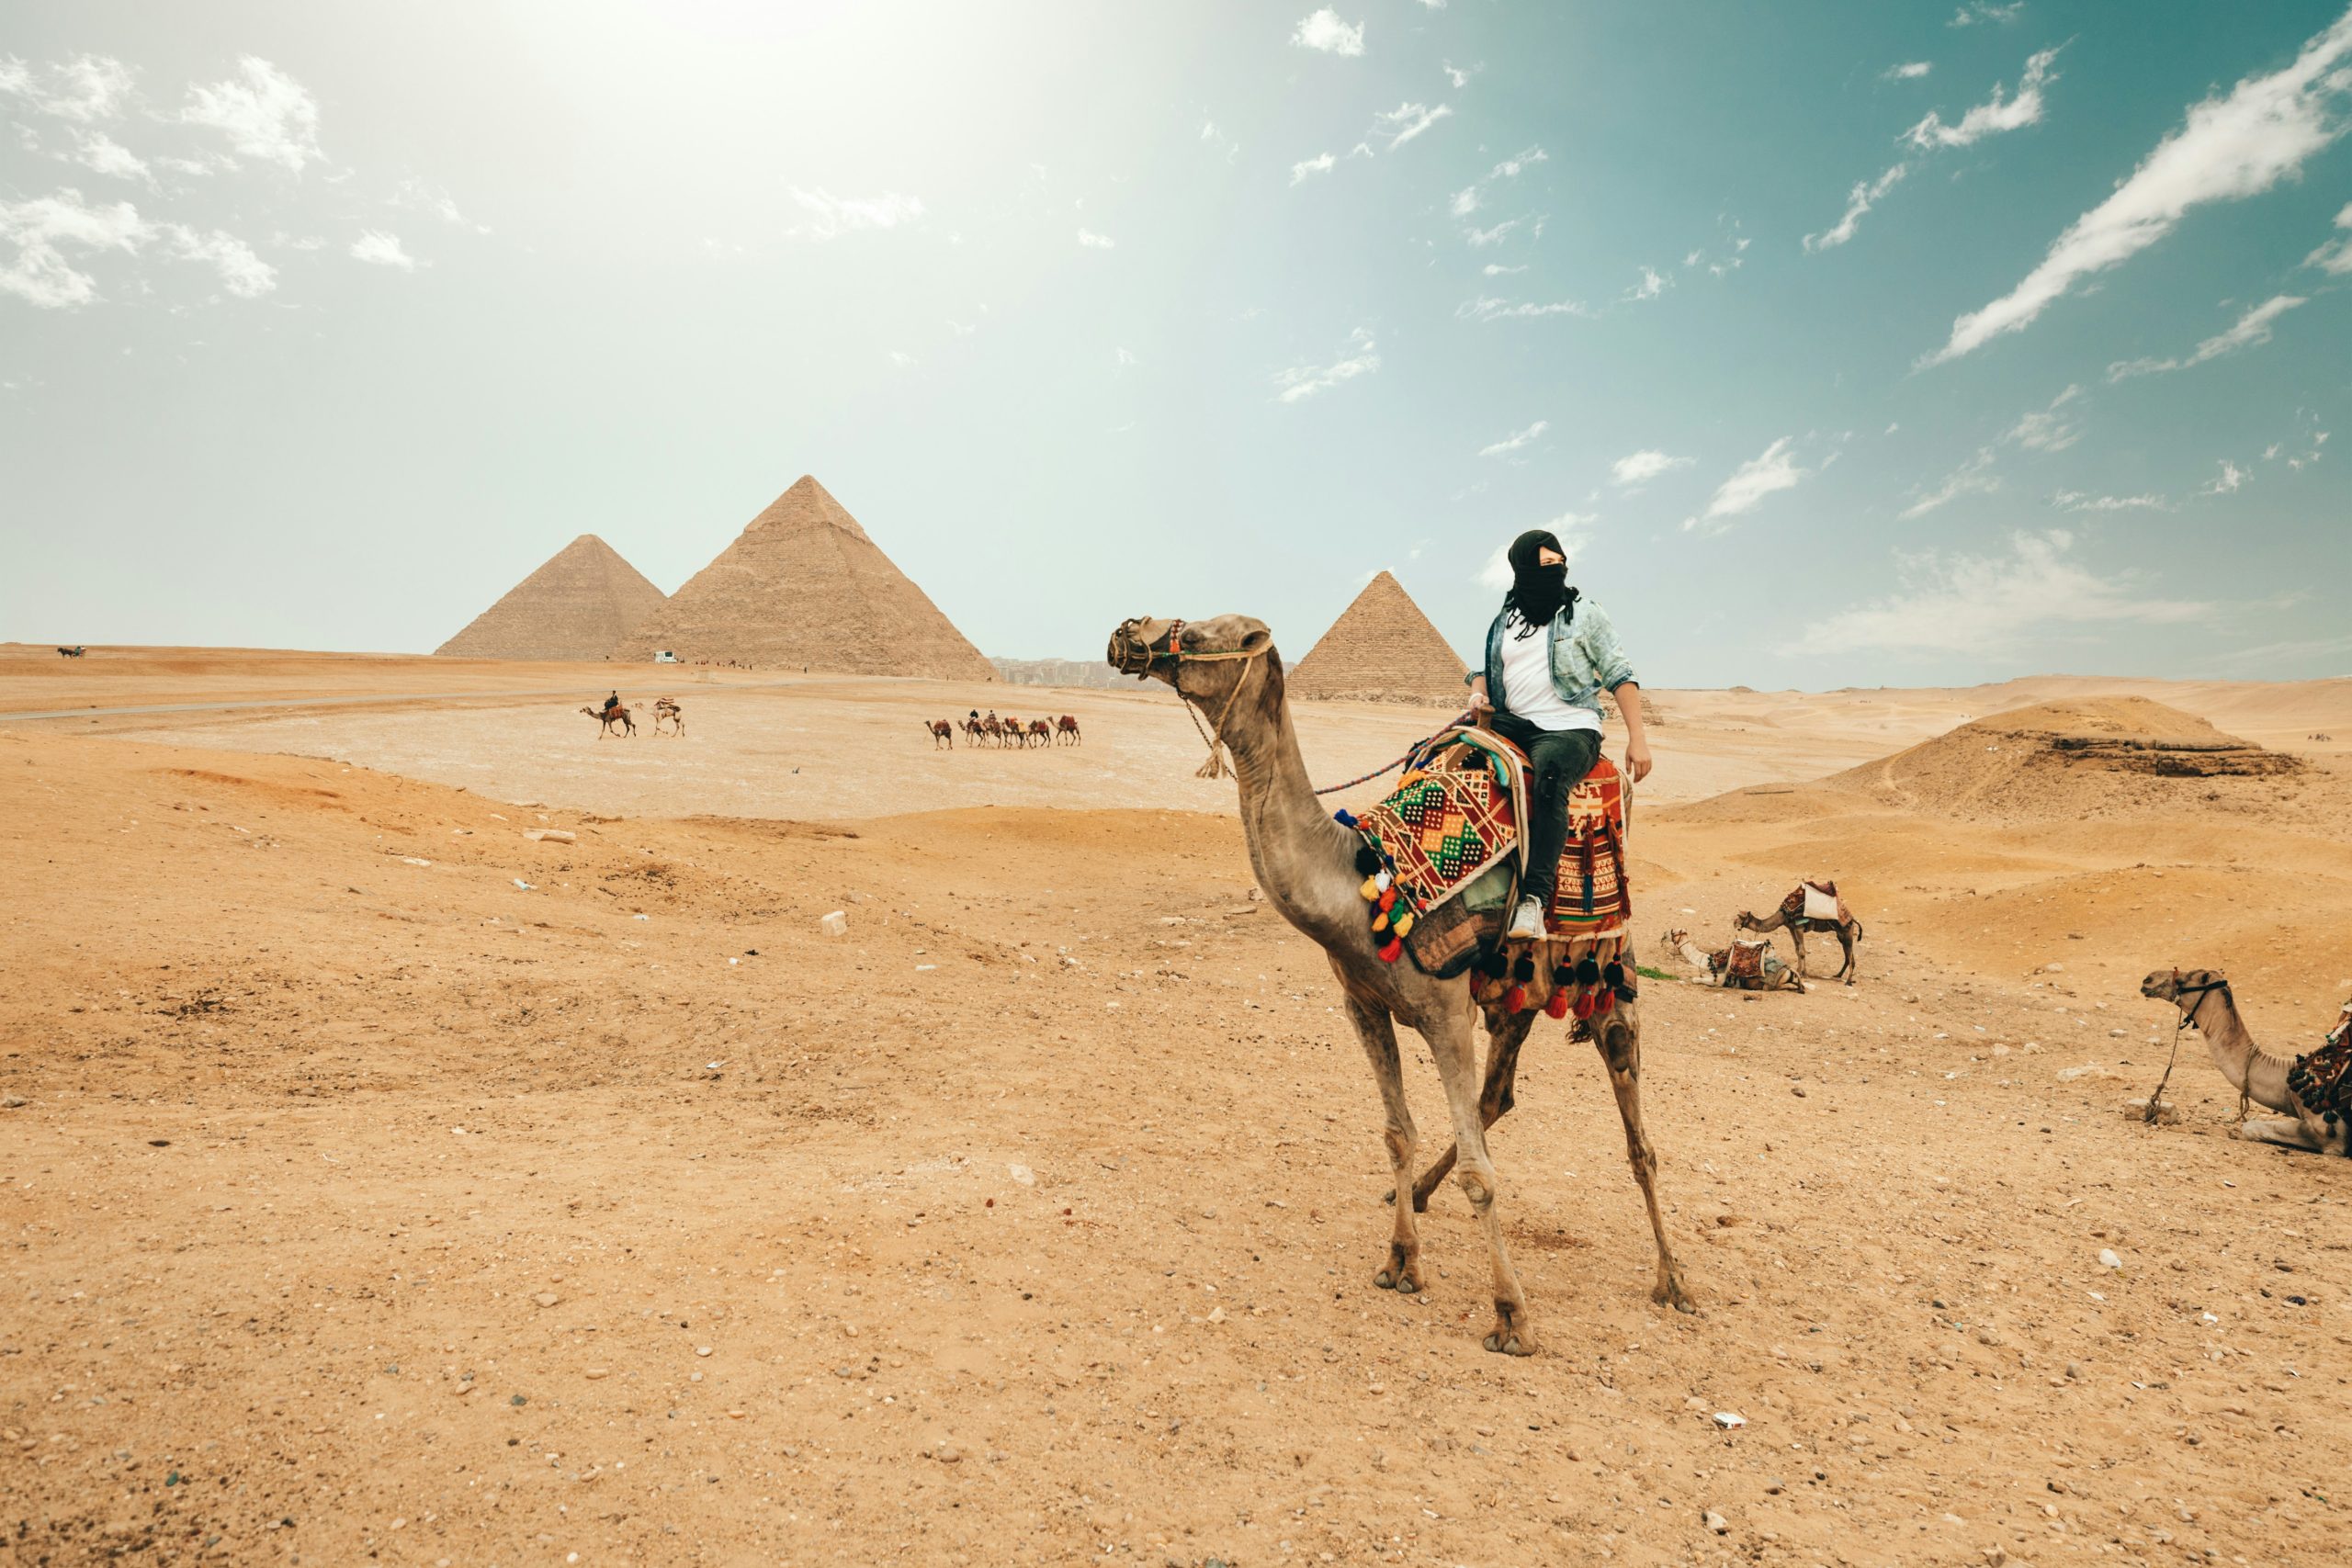 is it safe to travel to egypt as a woman